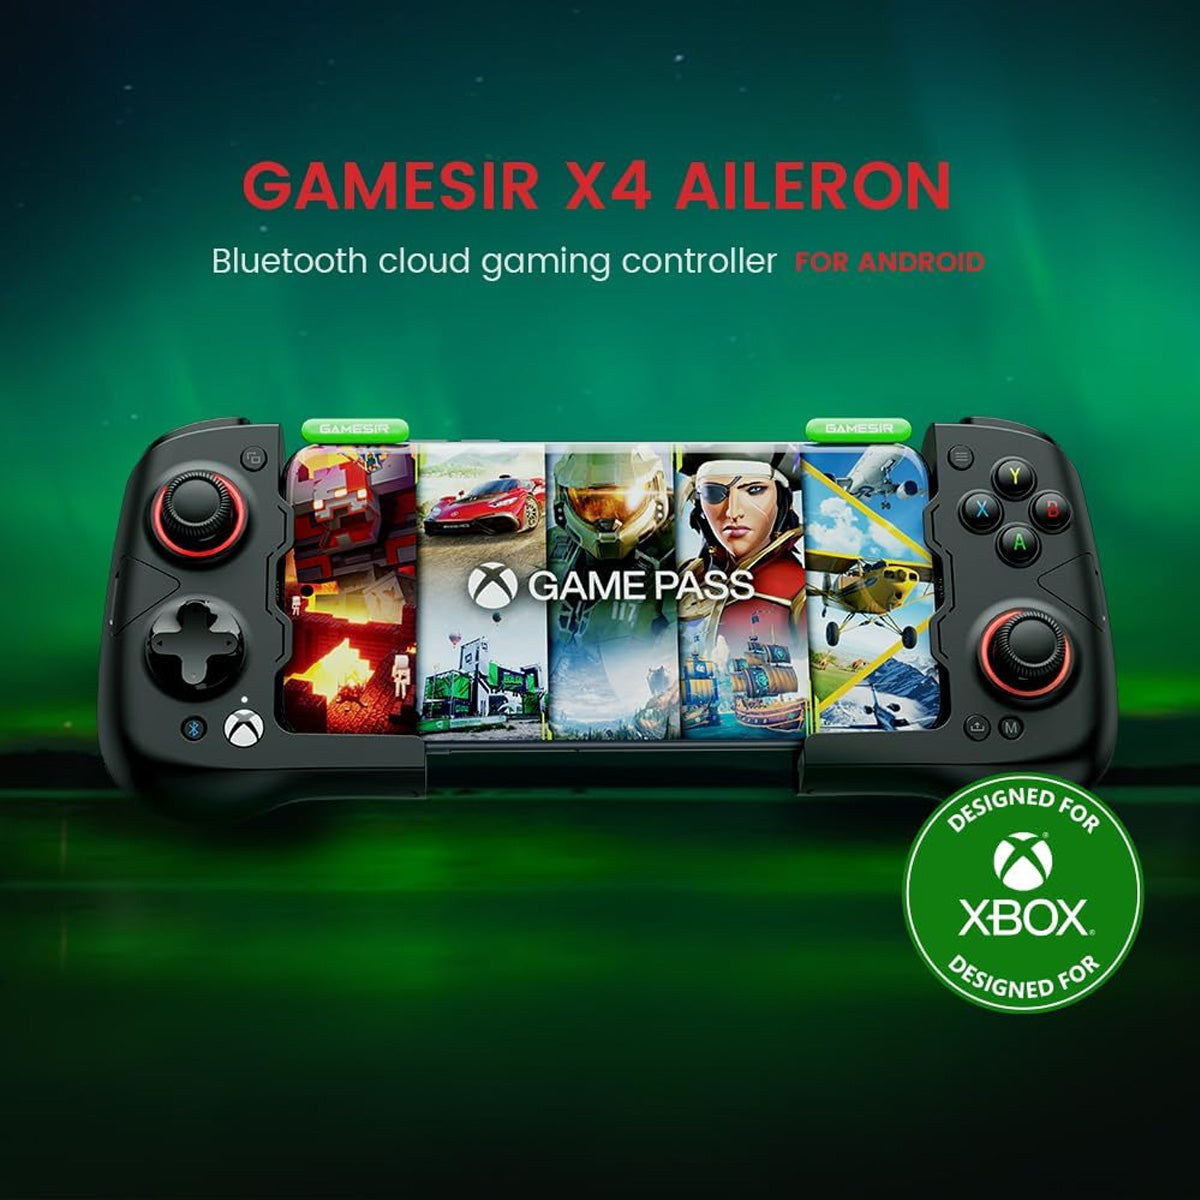 Gamesir X4 Aileron Bluetooth Cloud Gaming Controller for Android